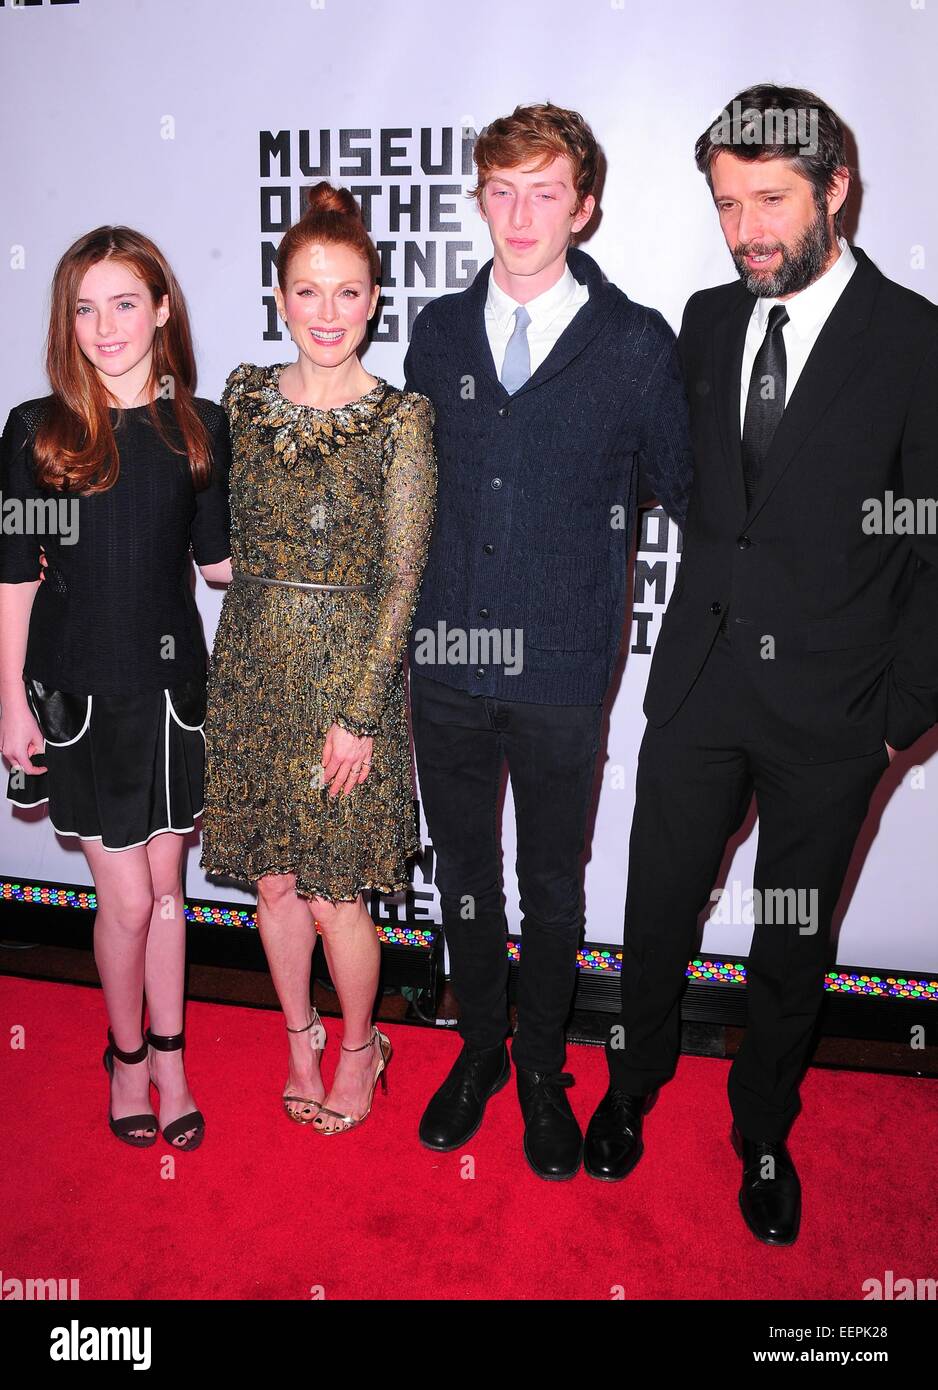 New York, NY, USA. 20th Jan, 2015. Liv Freundlich, Julianne Moore, Caleb Freundlich, Bart Freundlich at arrivals for Museum Of The Moving Image 29th Annual Black-Tie Salute to Julianne Moore, 583 Park Avenue, New York, NY January 20, 2015. Credit:  Gregorio T. Binuya/Everett Collection/Alamy Live News Stock Photo